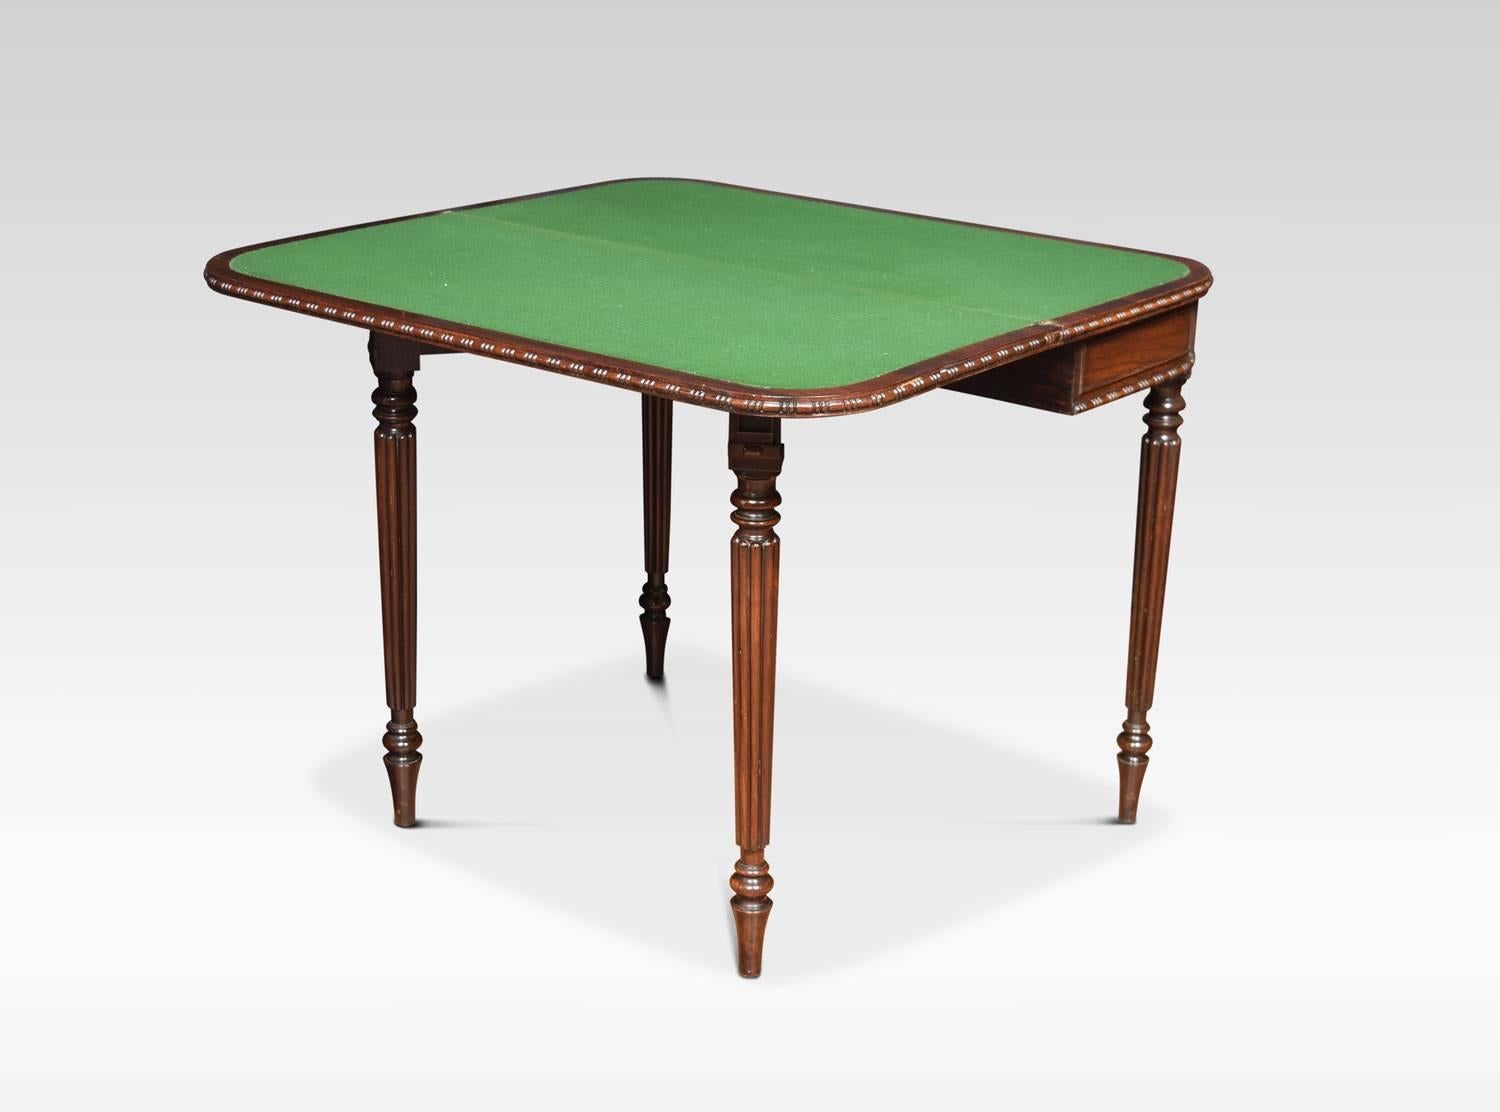 Regency card table, the well figured folding and swivel rosewood top opening to reveal inset baize interior. To the moulded freeze, all raised up on four reeded turned tapering legs.
Dimensions:
Height 29.5 inches
Width 36 inches
Depth 17 inches.